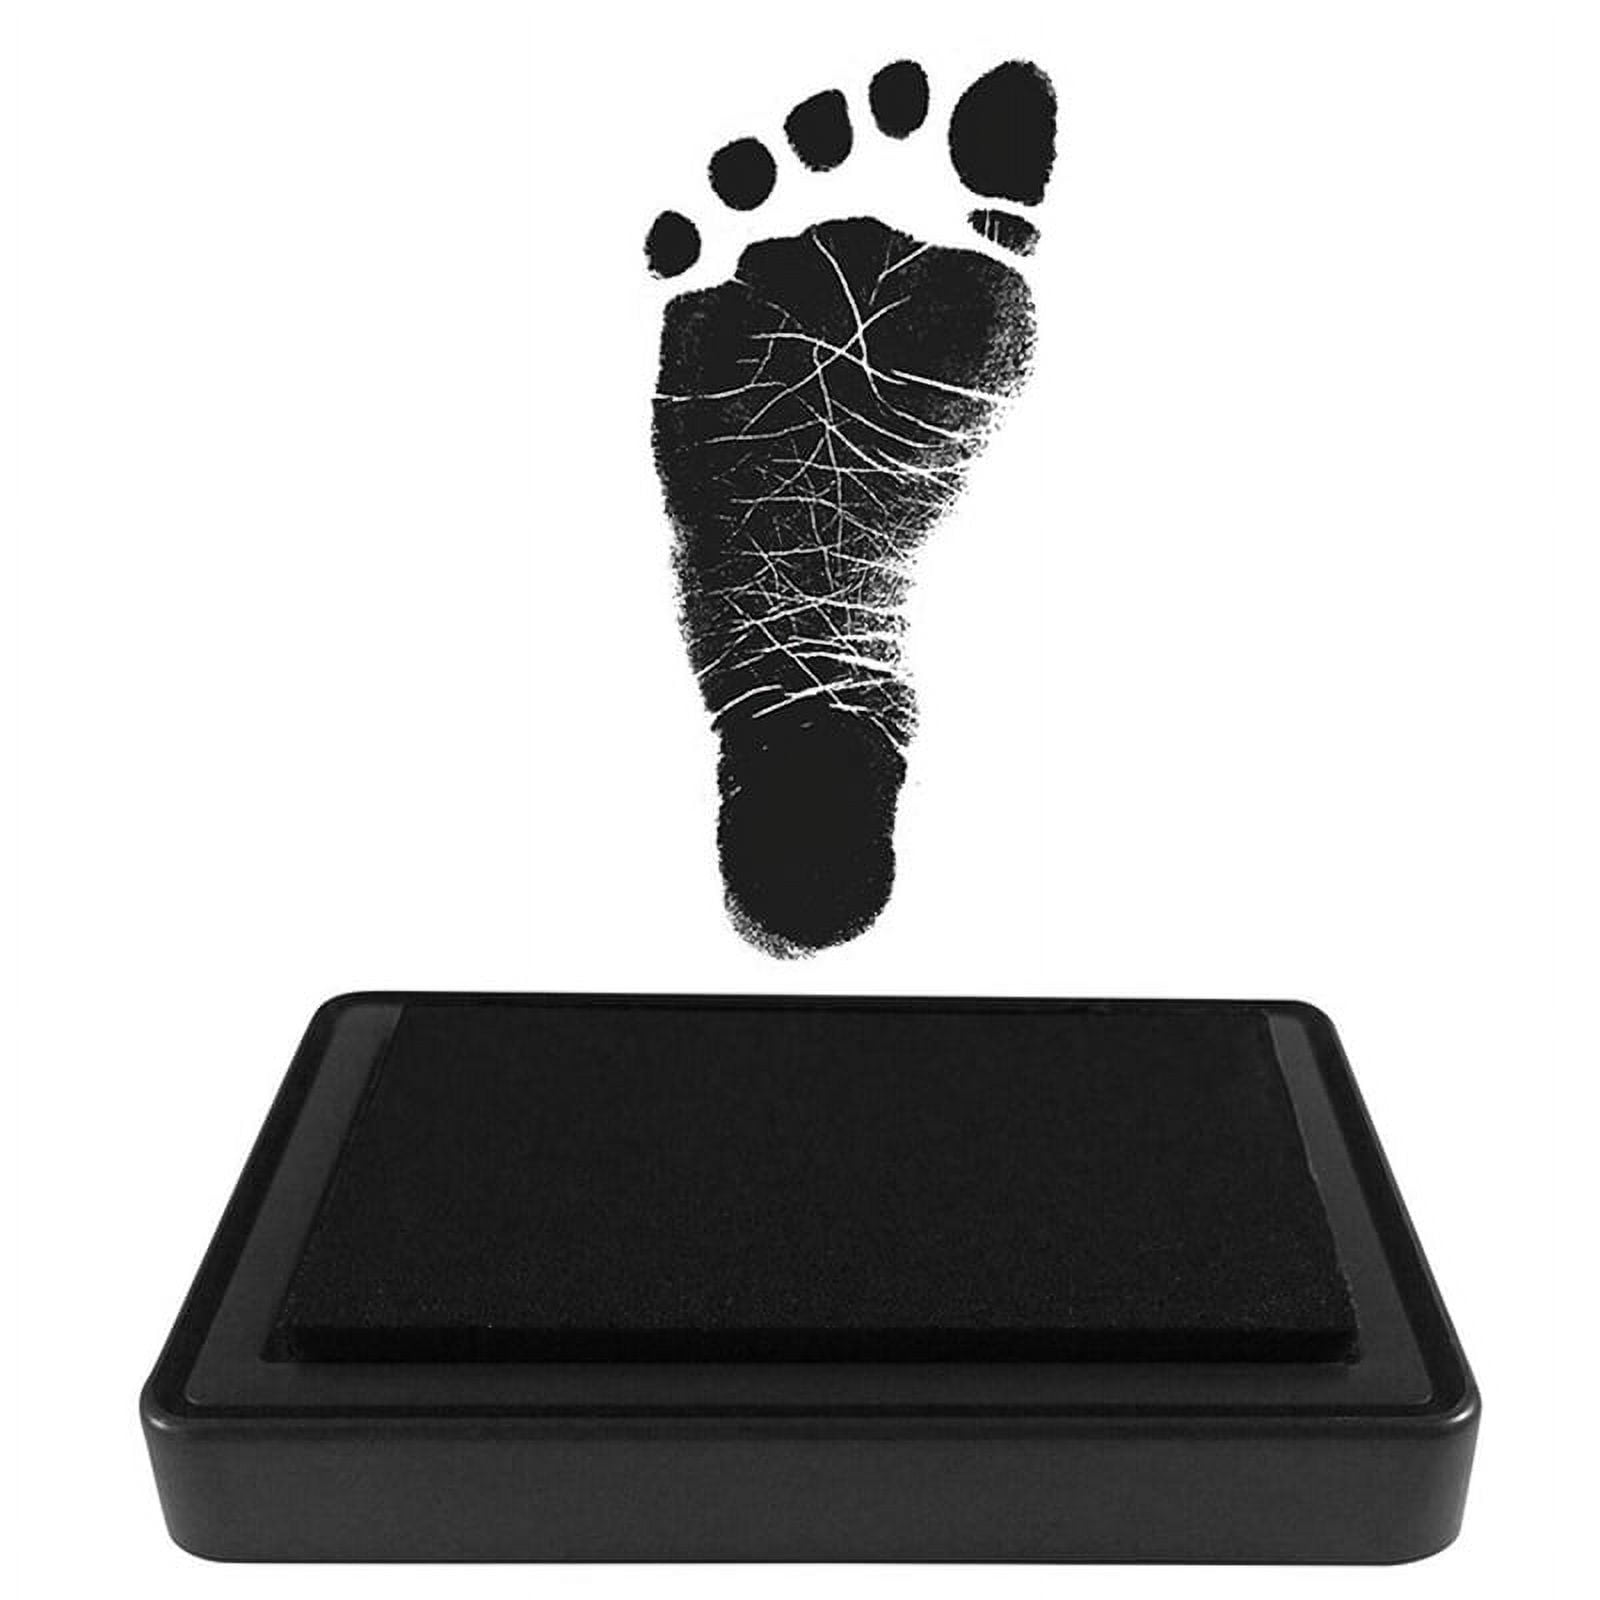 Baby Footprint Art in Stunning Pastel Shades Inkless Footprint Kit Included Baby  Footprint Keepsake New Baby Gift Baby Shower Gift 